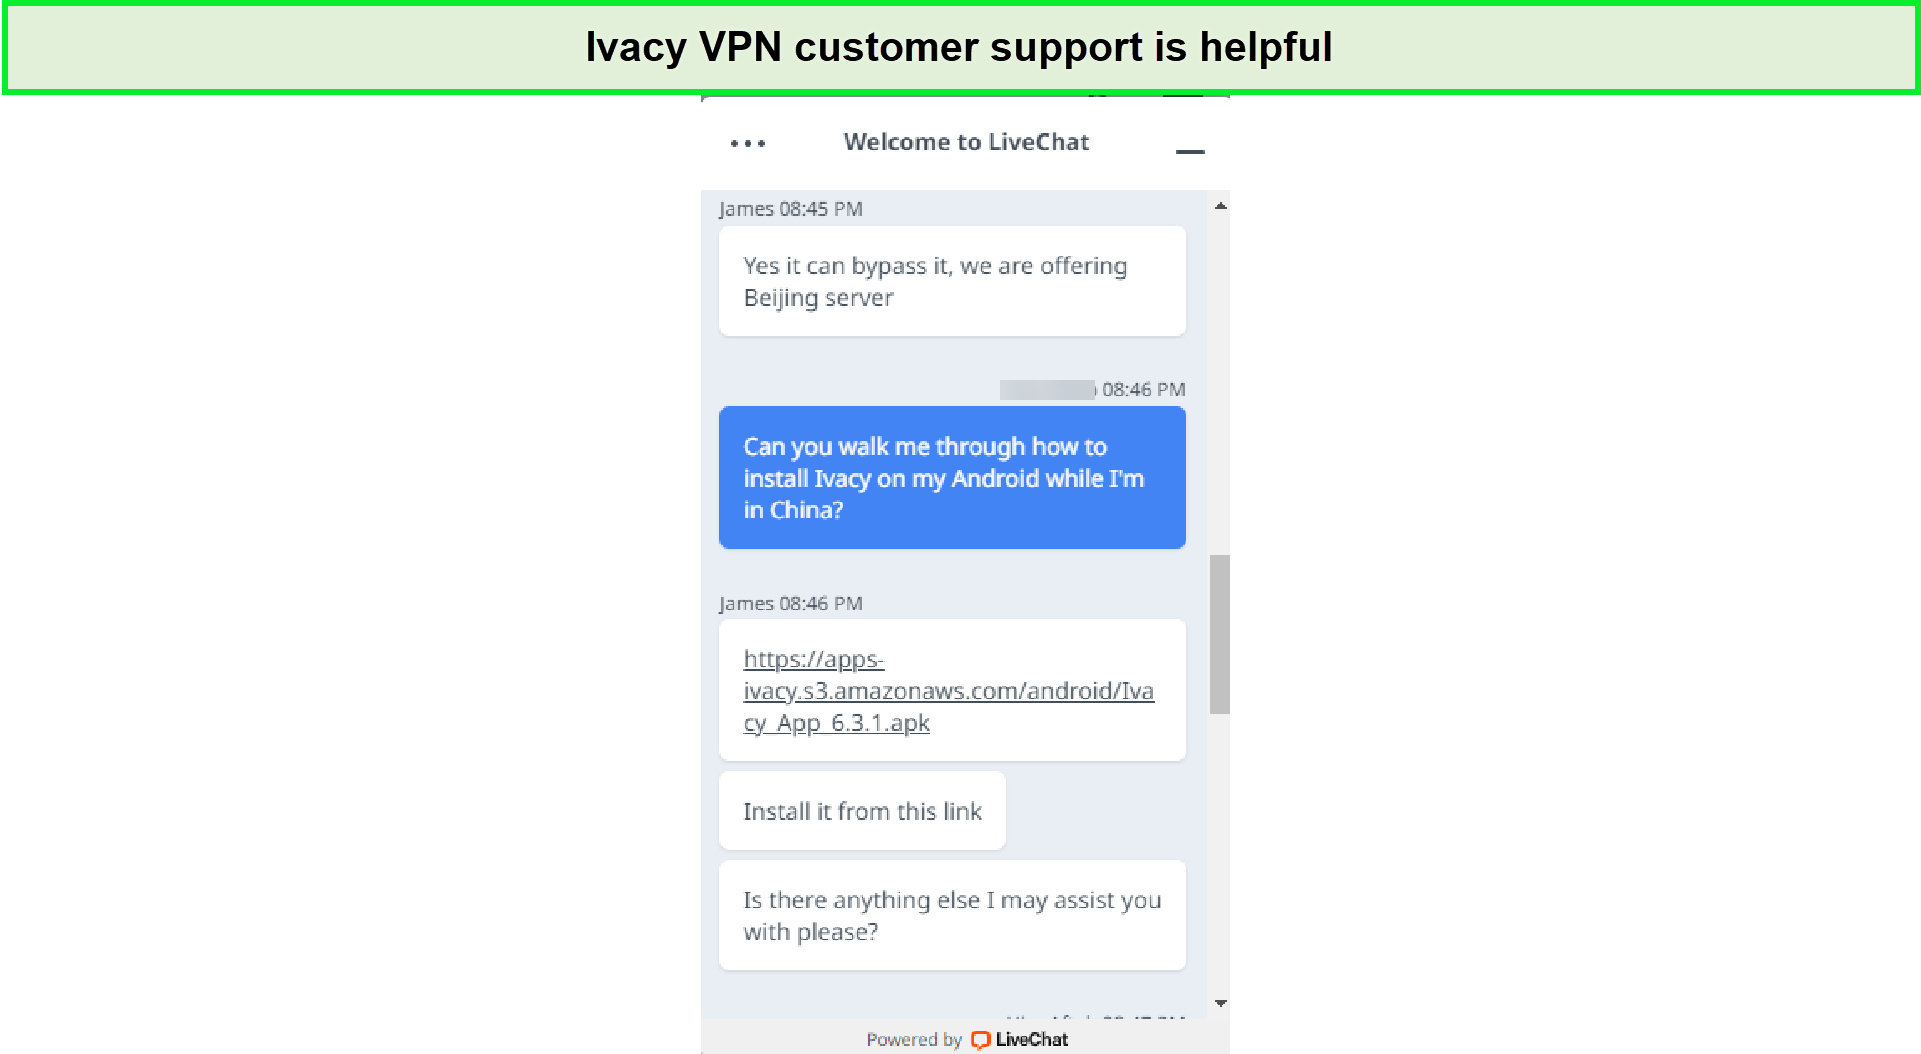 ivacy-customer-support